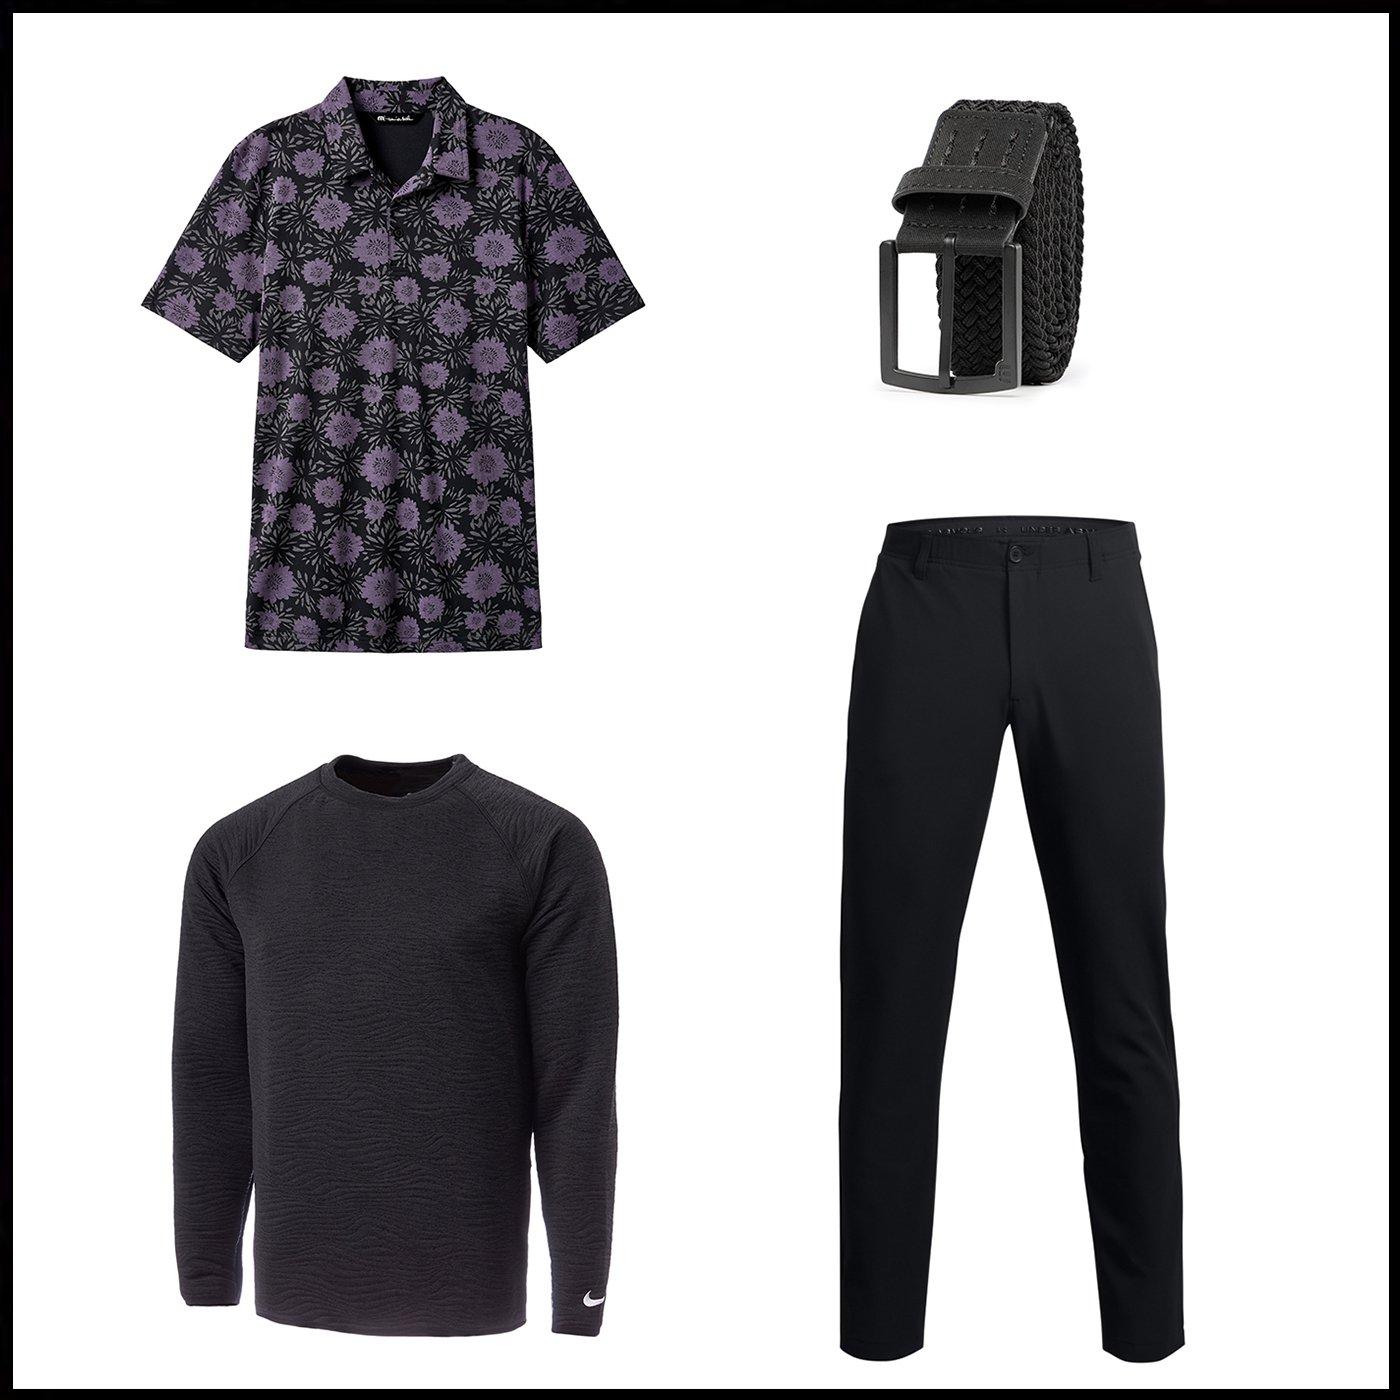 Men's Lifestyle Outfit